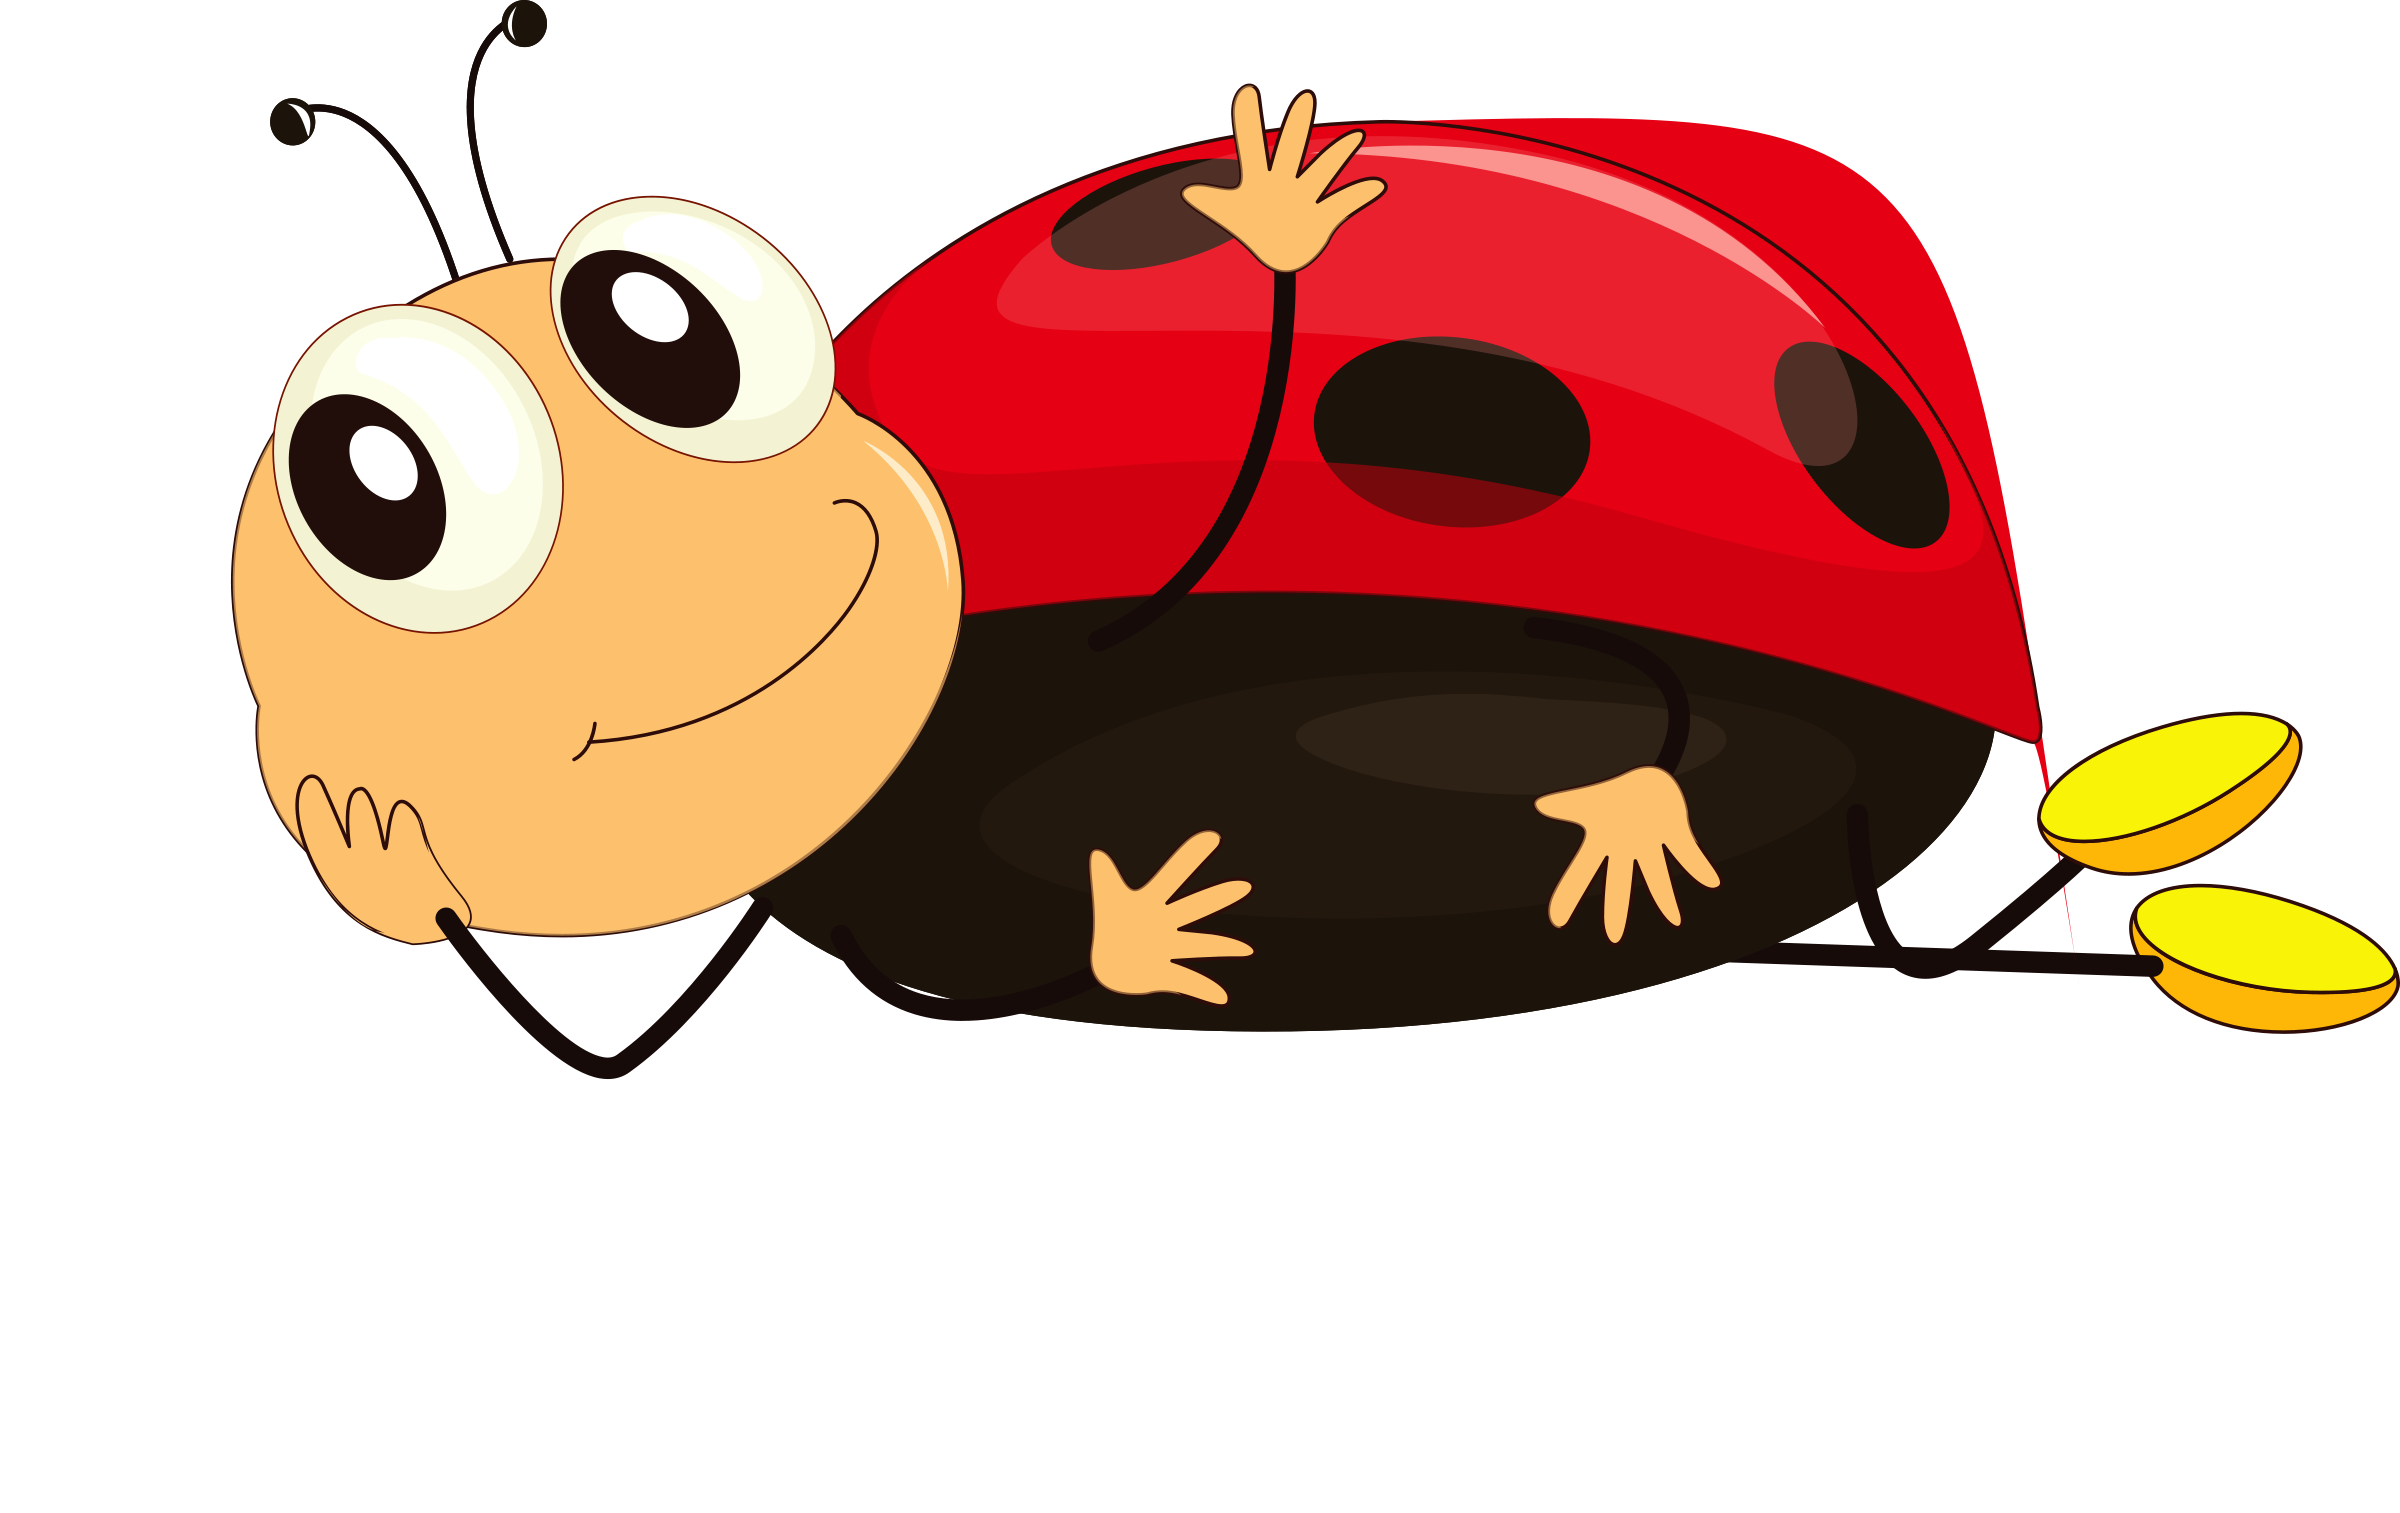 Insects images on page. Ladybugs clipart cartoon